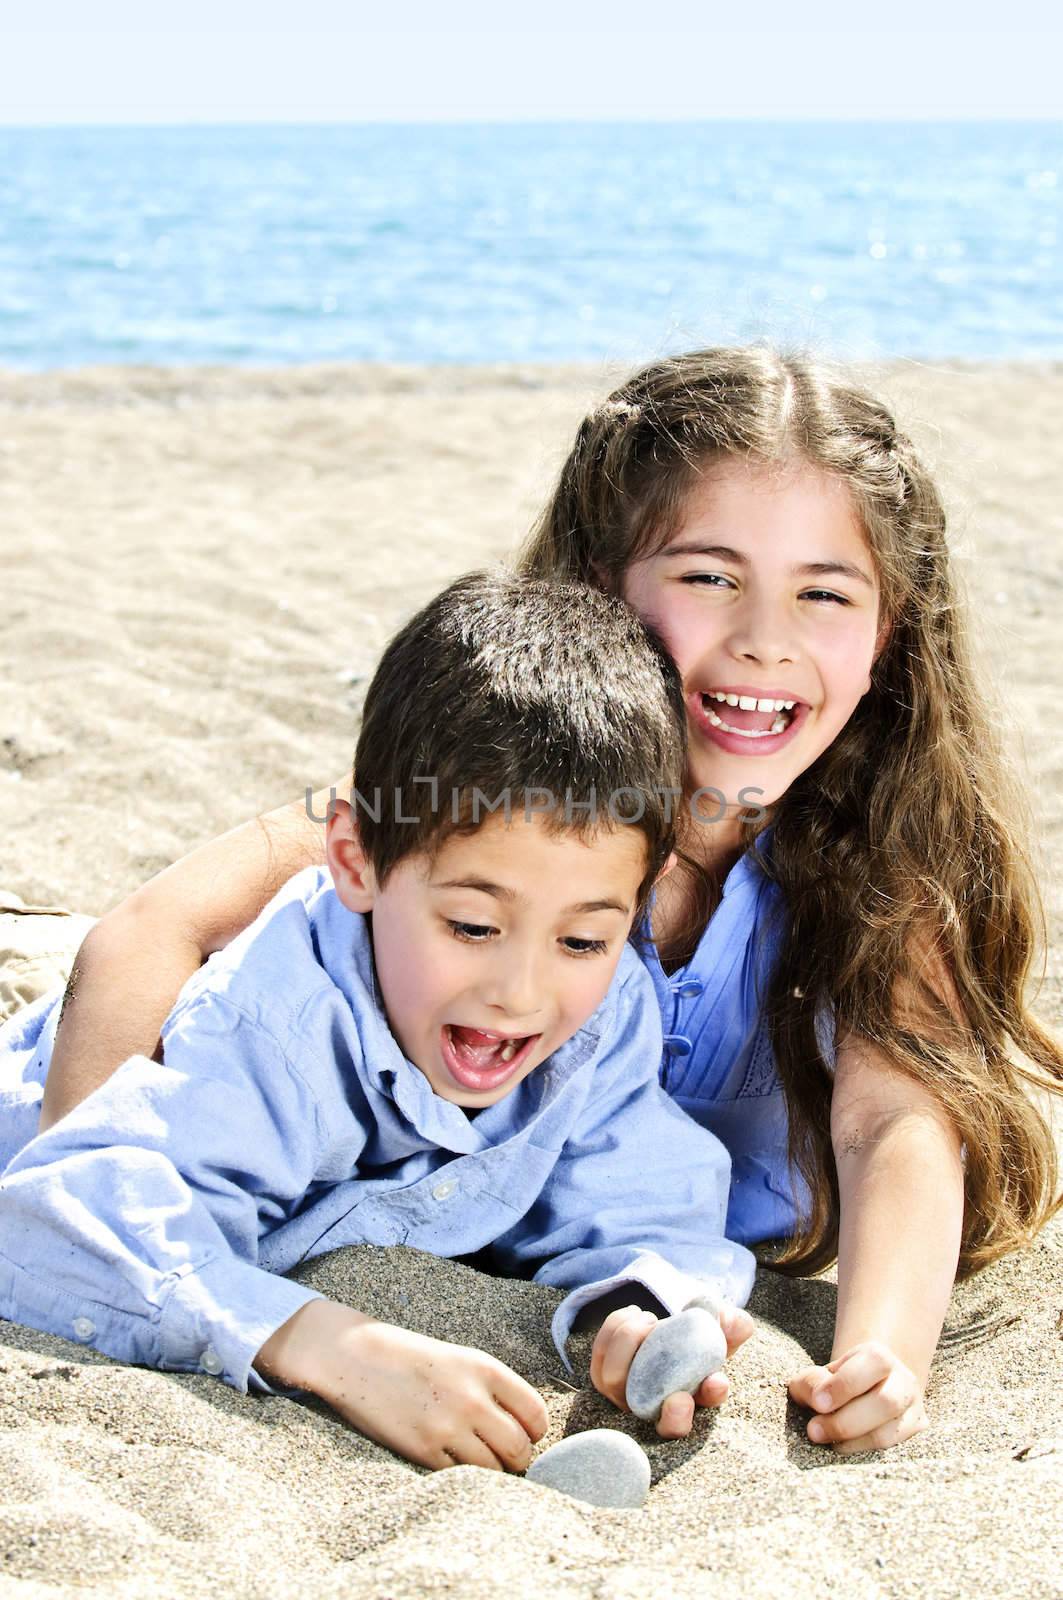 Brother and sister at beach by elenathewise